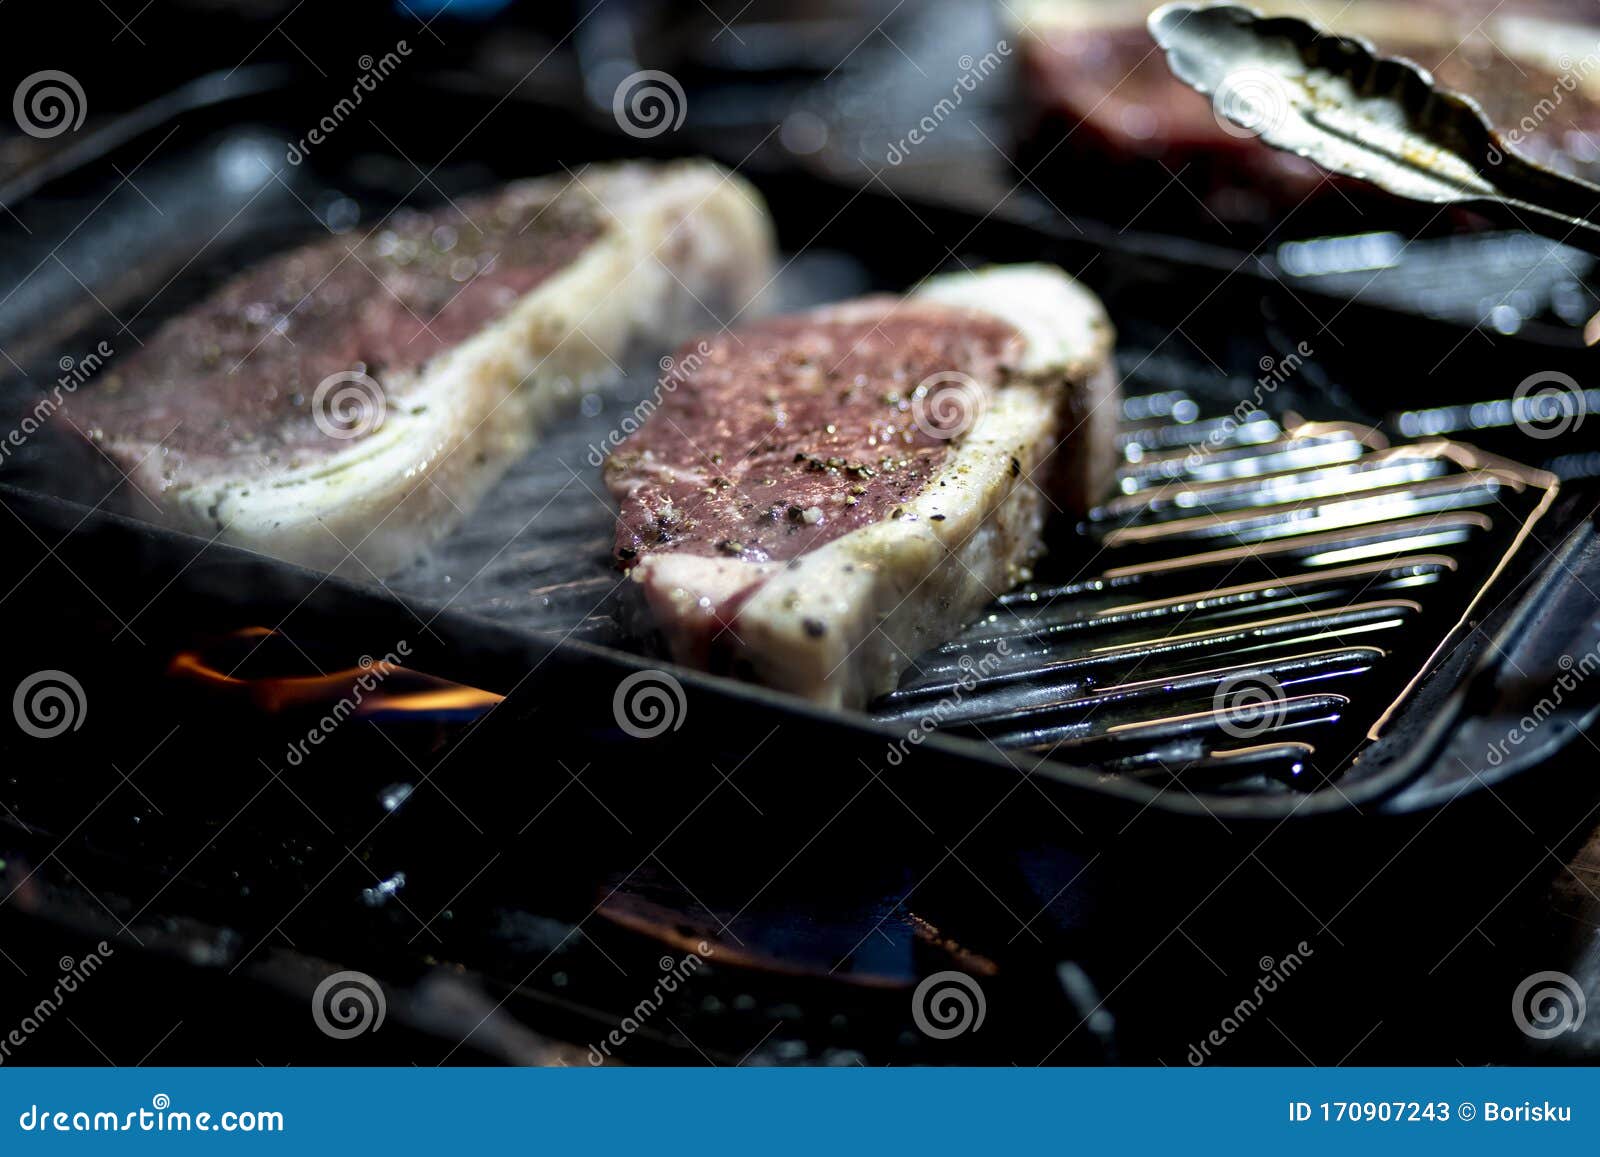 red meat preparetion on a grill